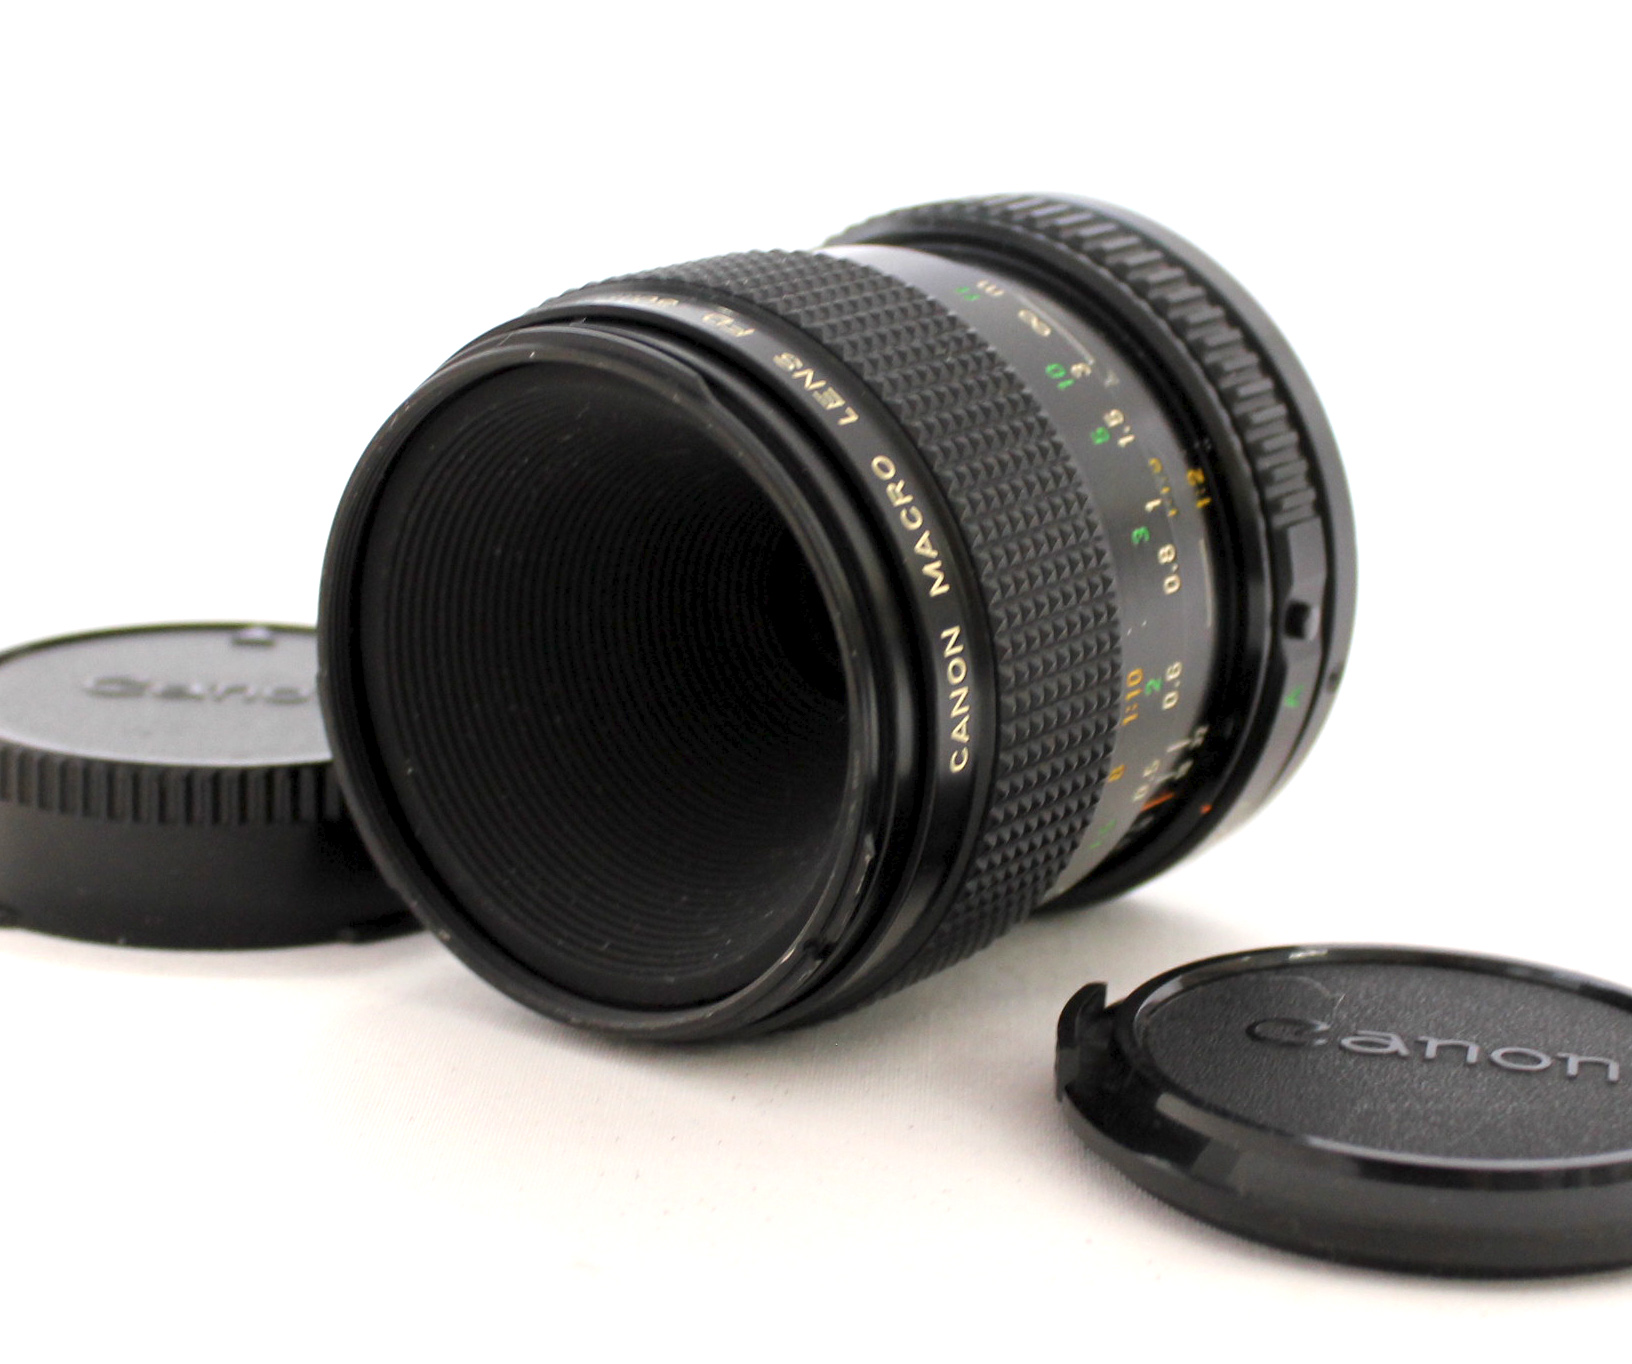 Japan Used Camera Shop | [Excellent+++++] Canon New FD NFD 50mm F/3.5 Macro Lens from Japan